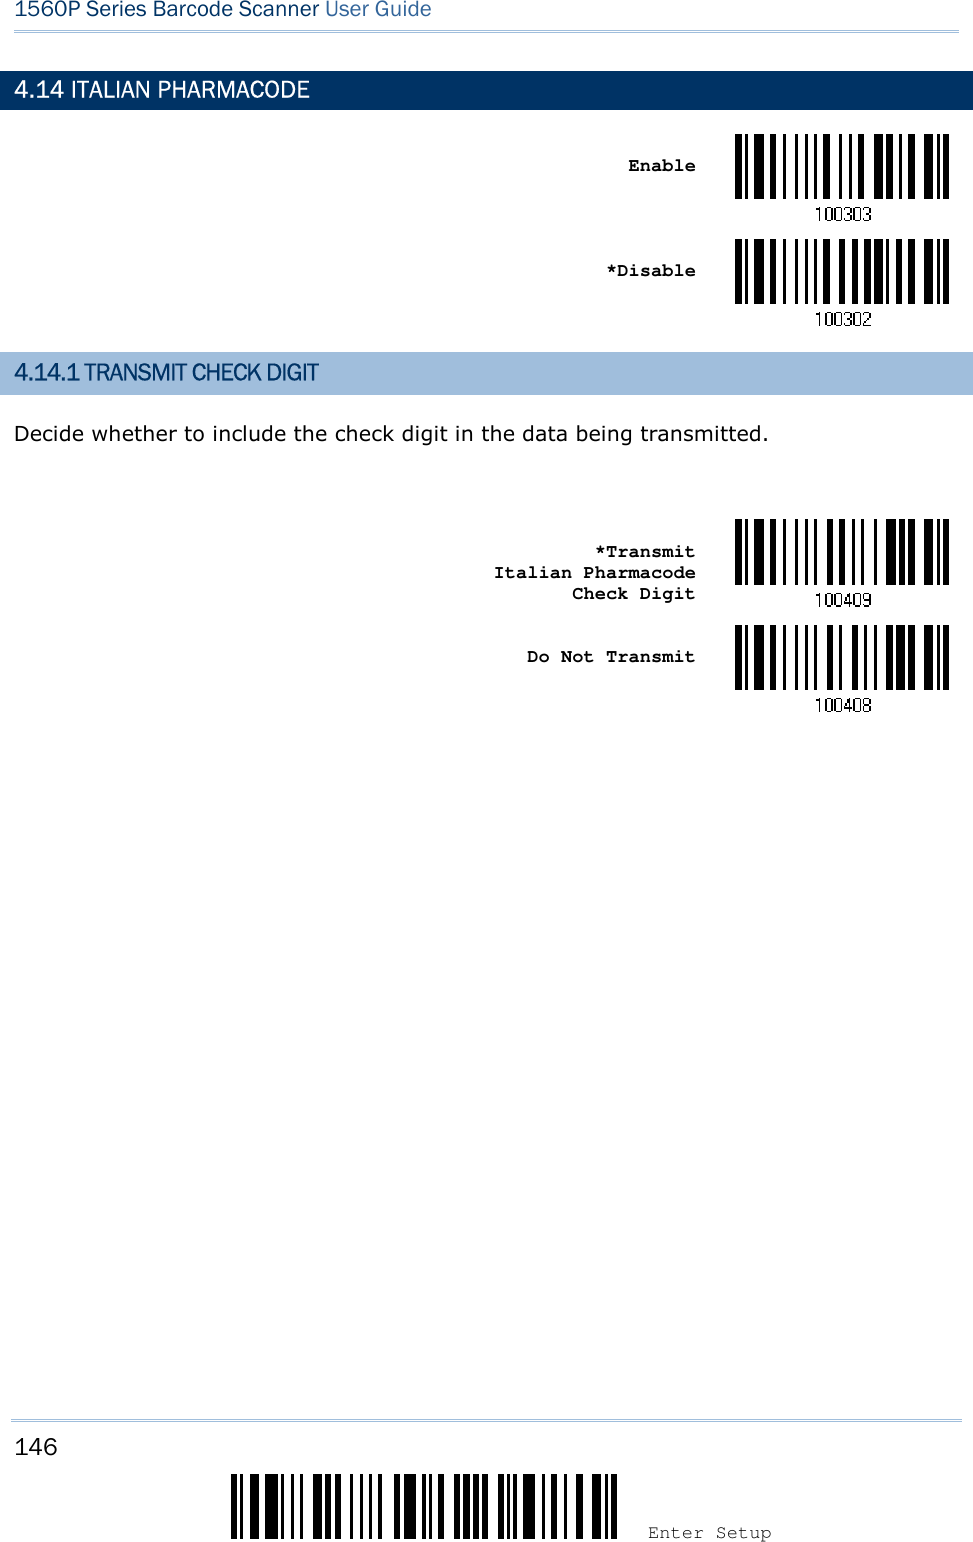 146 Enter Setup 1560P Series Barcode Scanner User Guide 4.14 ITALIAN PHARMACODE Enable *Disable4.14.1 TRANSMIT CHECK DIGIT Decide whether to include the check digit in the data being transmitted. *TransmitItalian Pharmacode Check Digit Do Not Transmit 